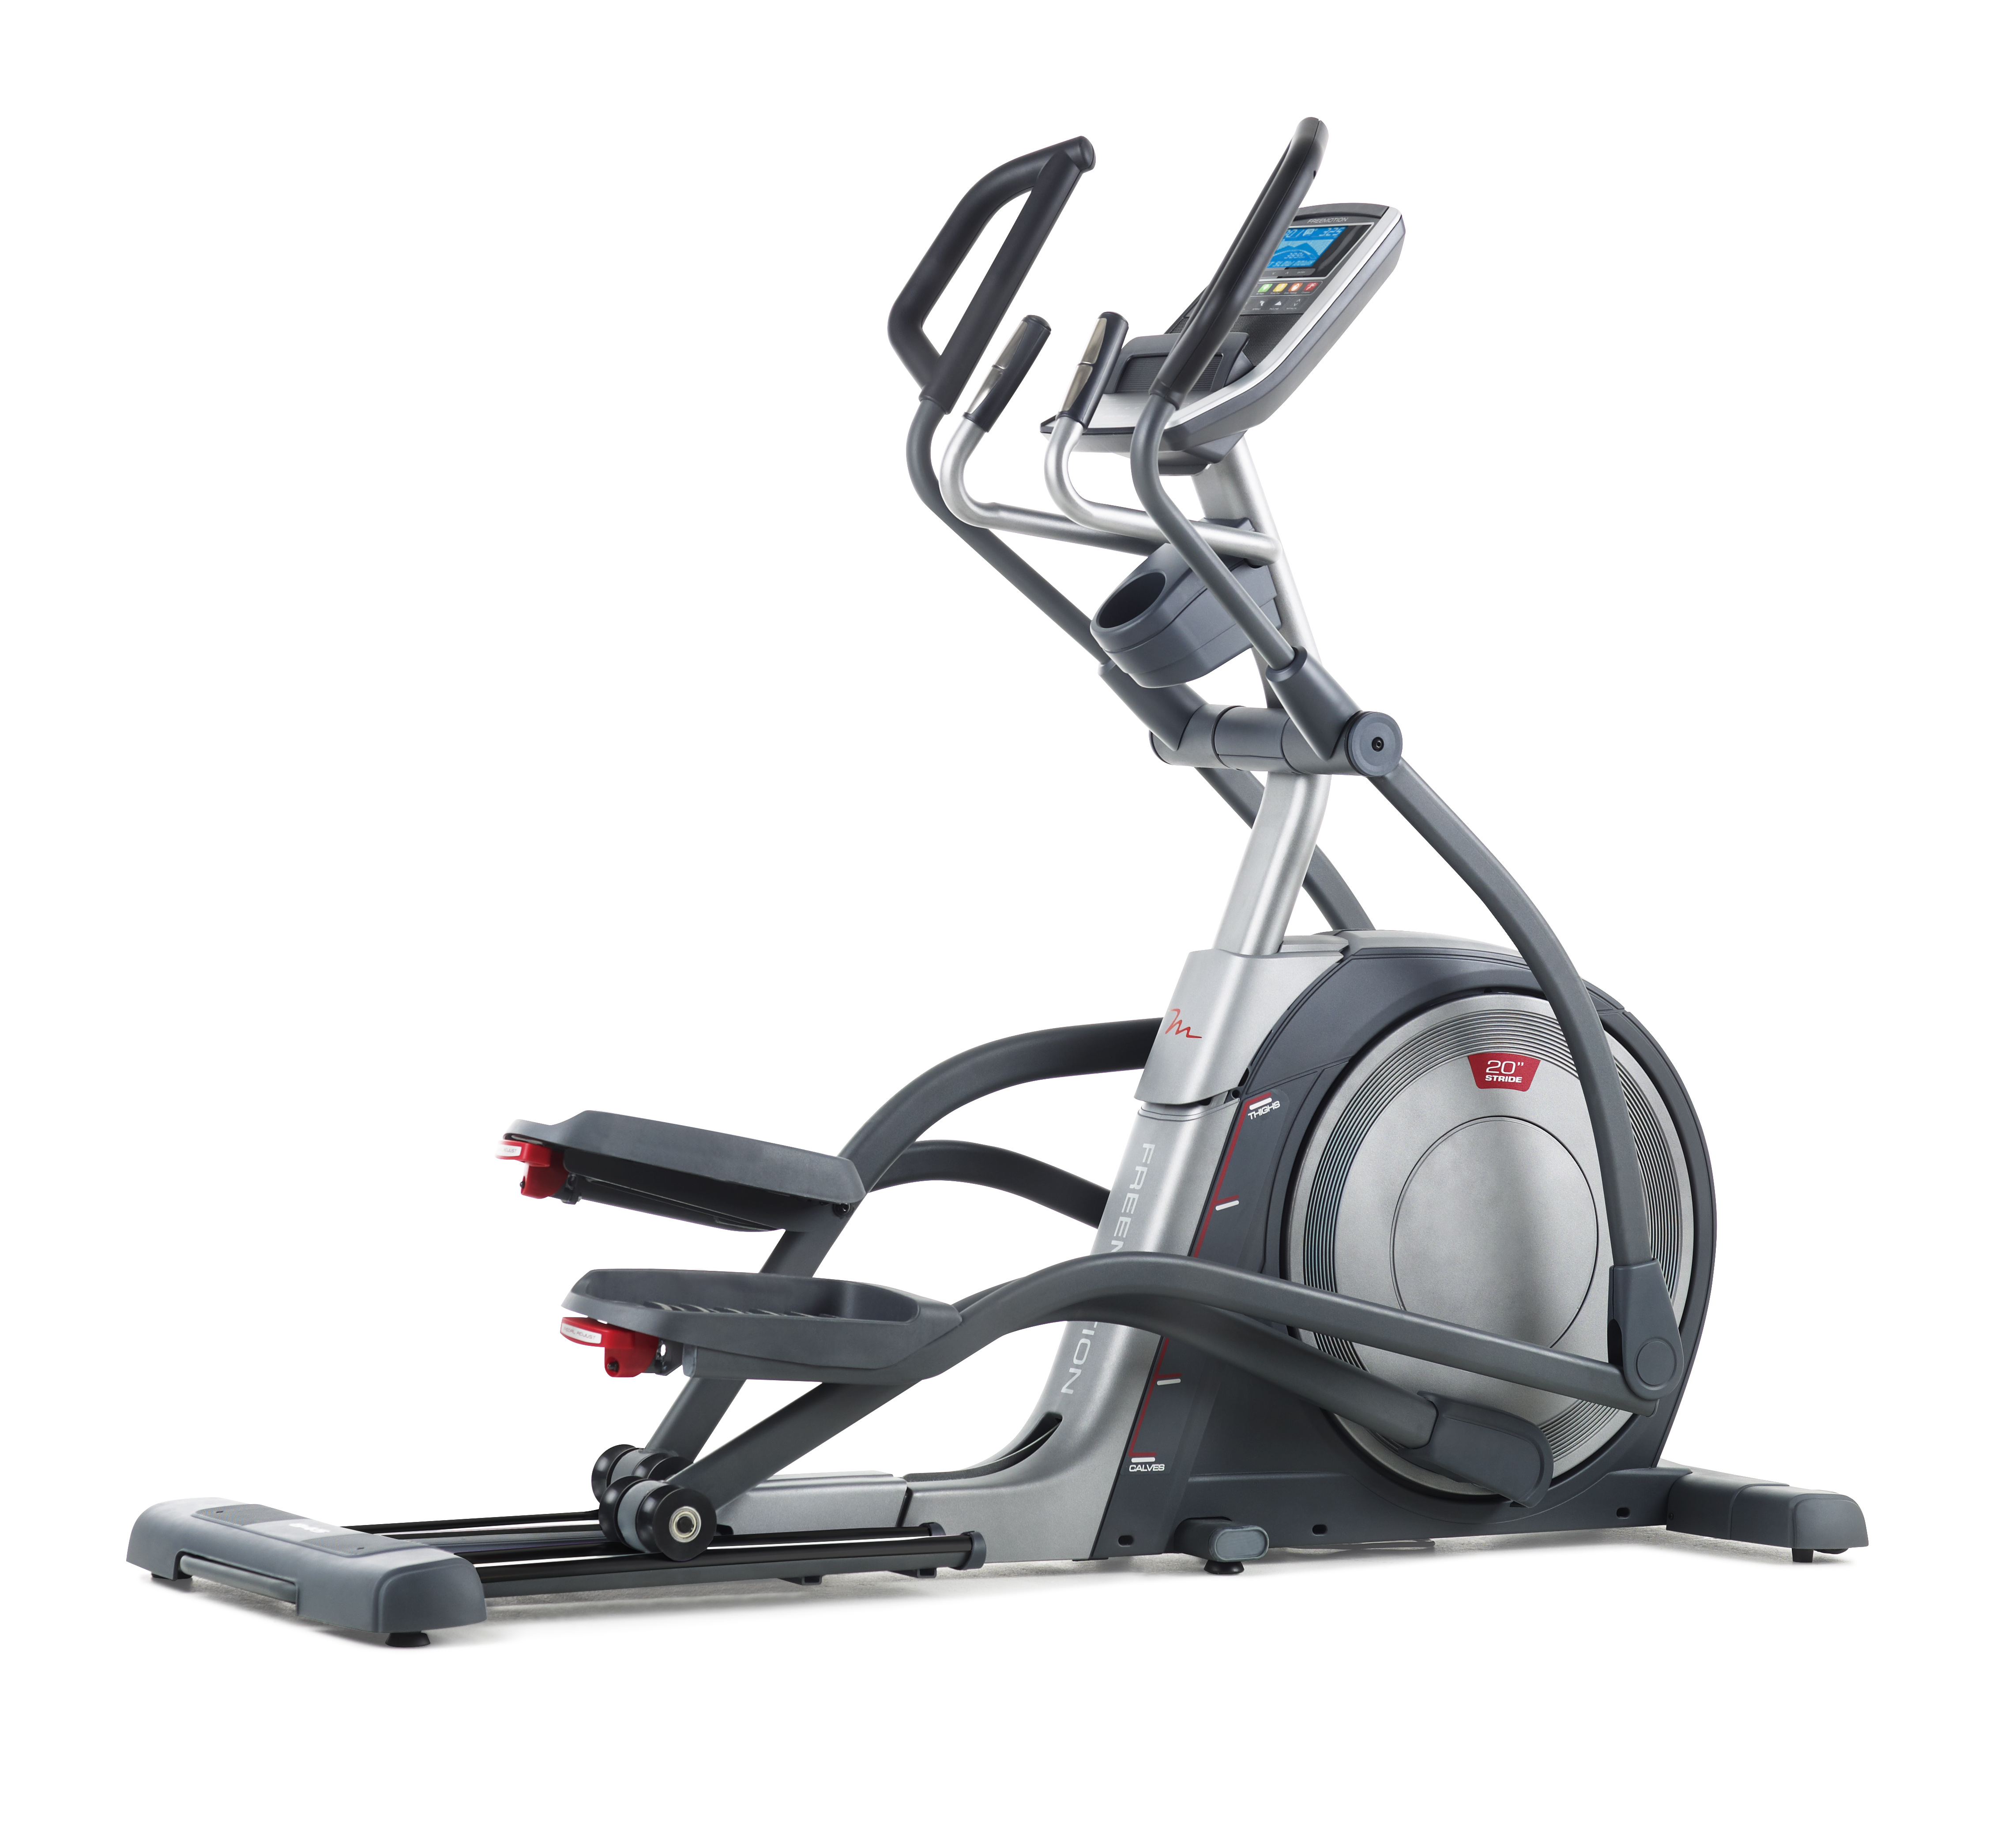 Freemotion 645 Commercial Grade Elliptical with Adjustable Incline - image 1 of 6